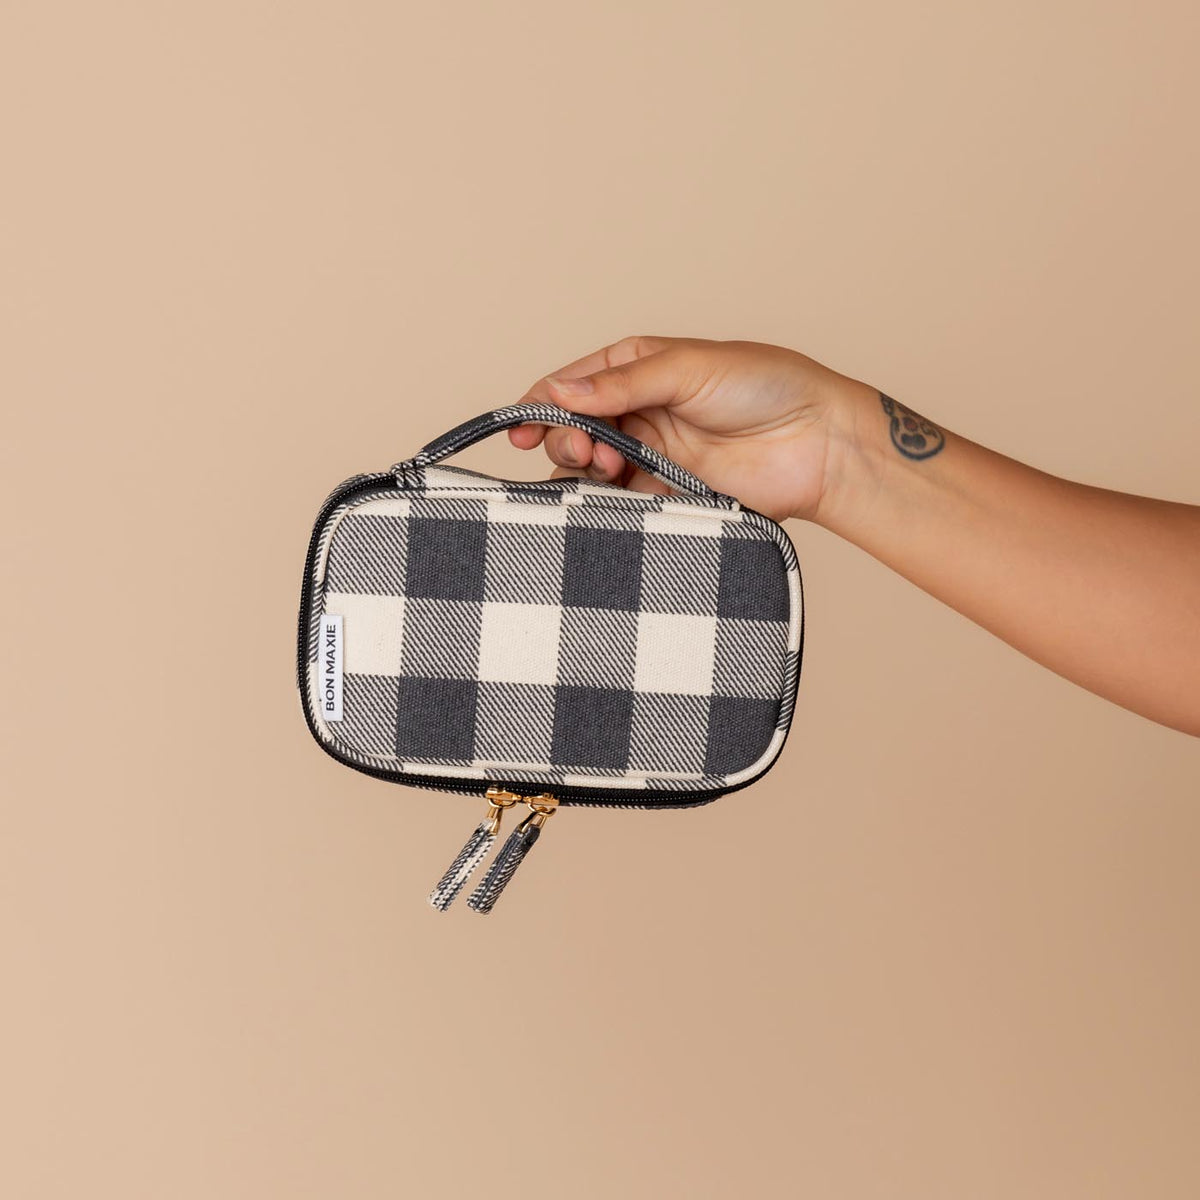 Handy Case With Handle - Black Gingham